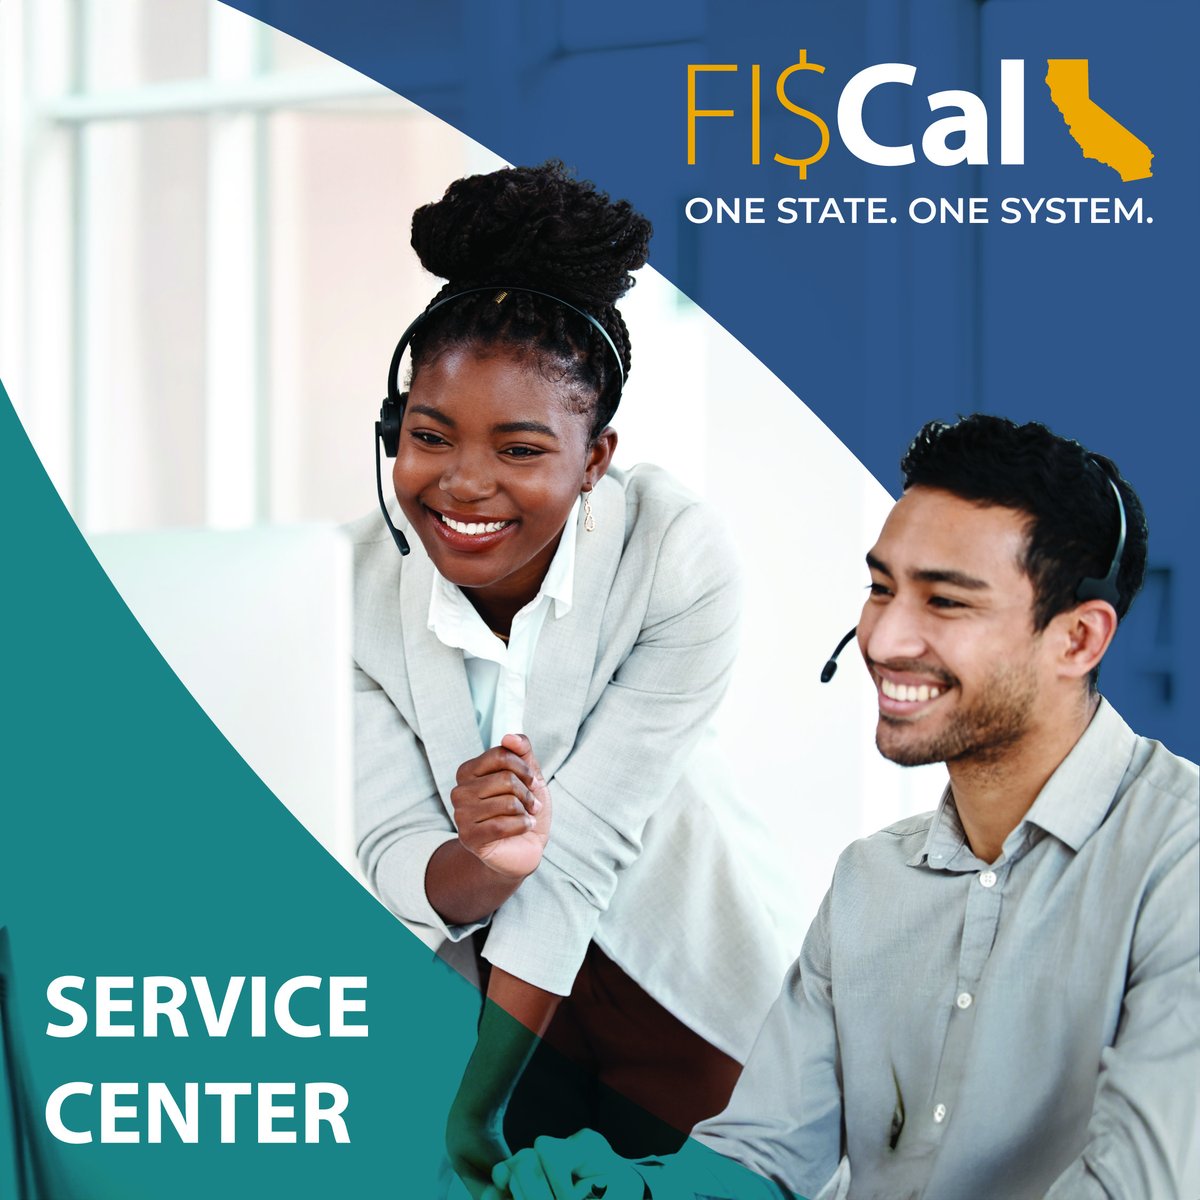 The FSC online portal provides end users with services such as a self-service ticketing process, open ticket and request tracking, and a searchable database with “how to” information and solutions for common issues. Learn more: Bit.ly/3TanXoV #CustomerService